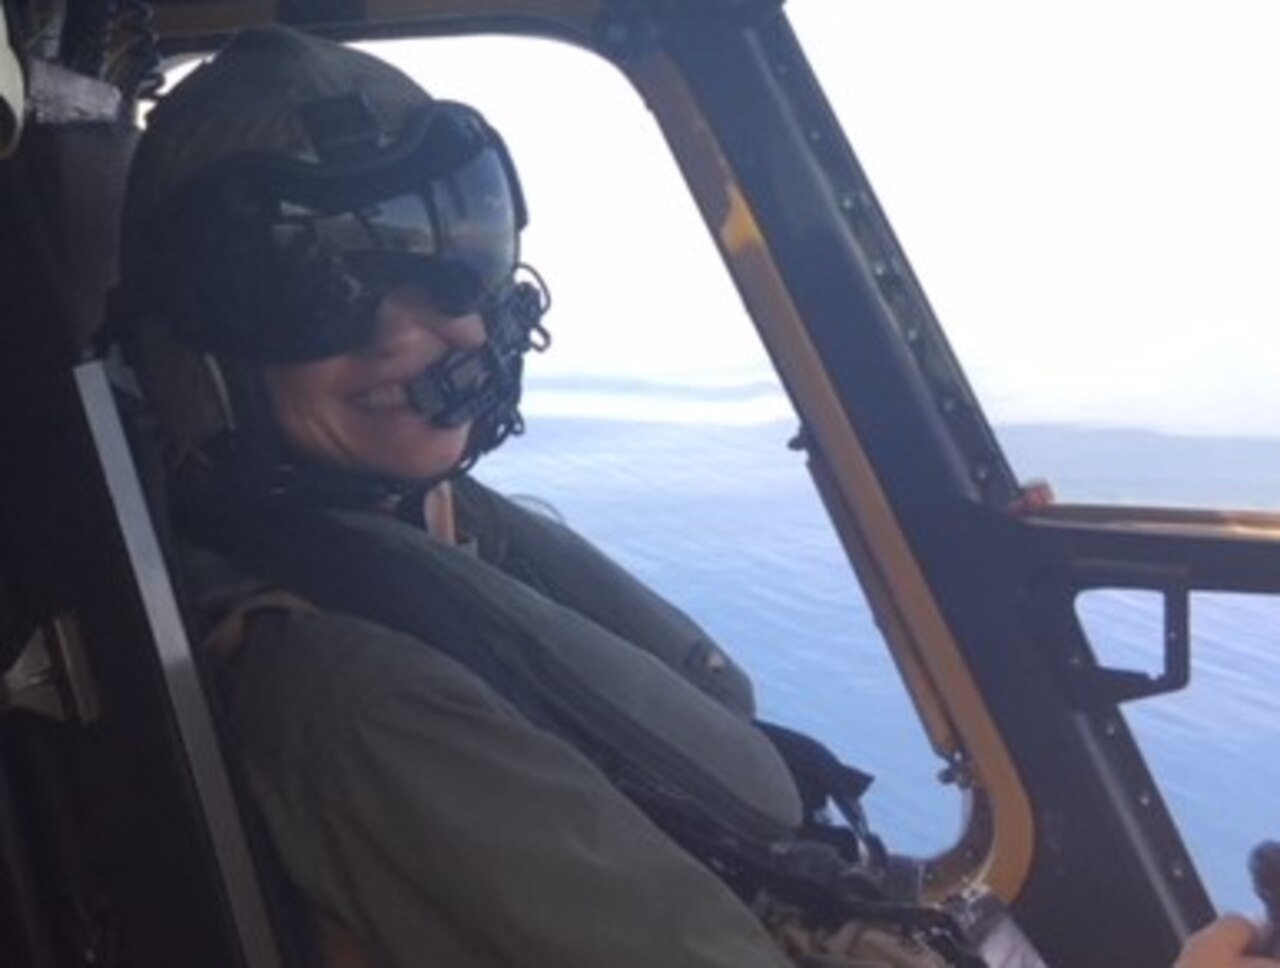 A Marine Corps helicopter pilot smiles while flying a CH-53E Super Stallion